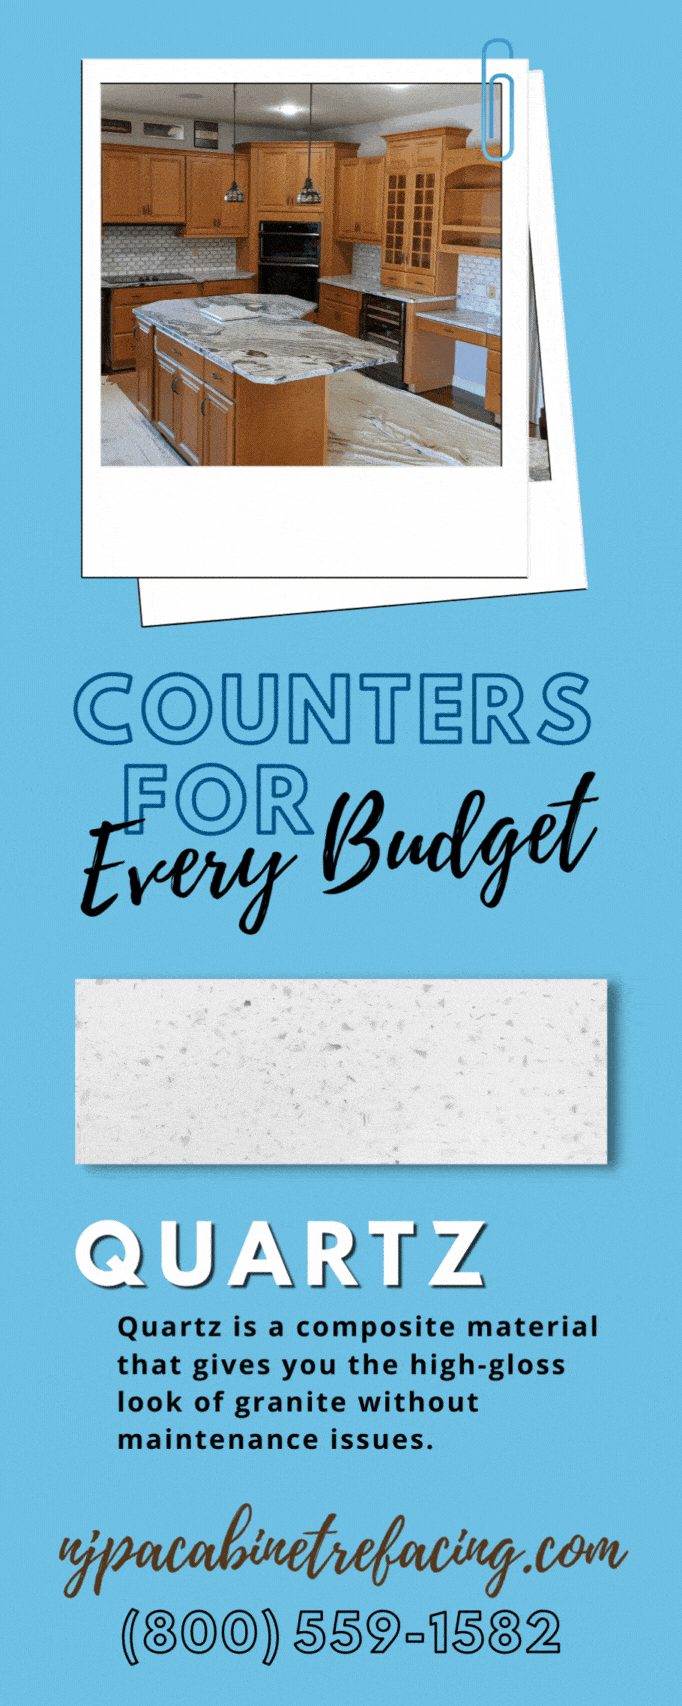 Counters for Every Budget! 1